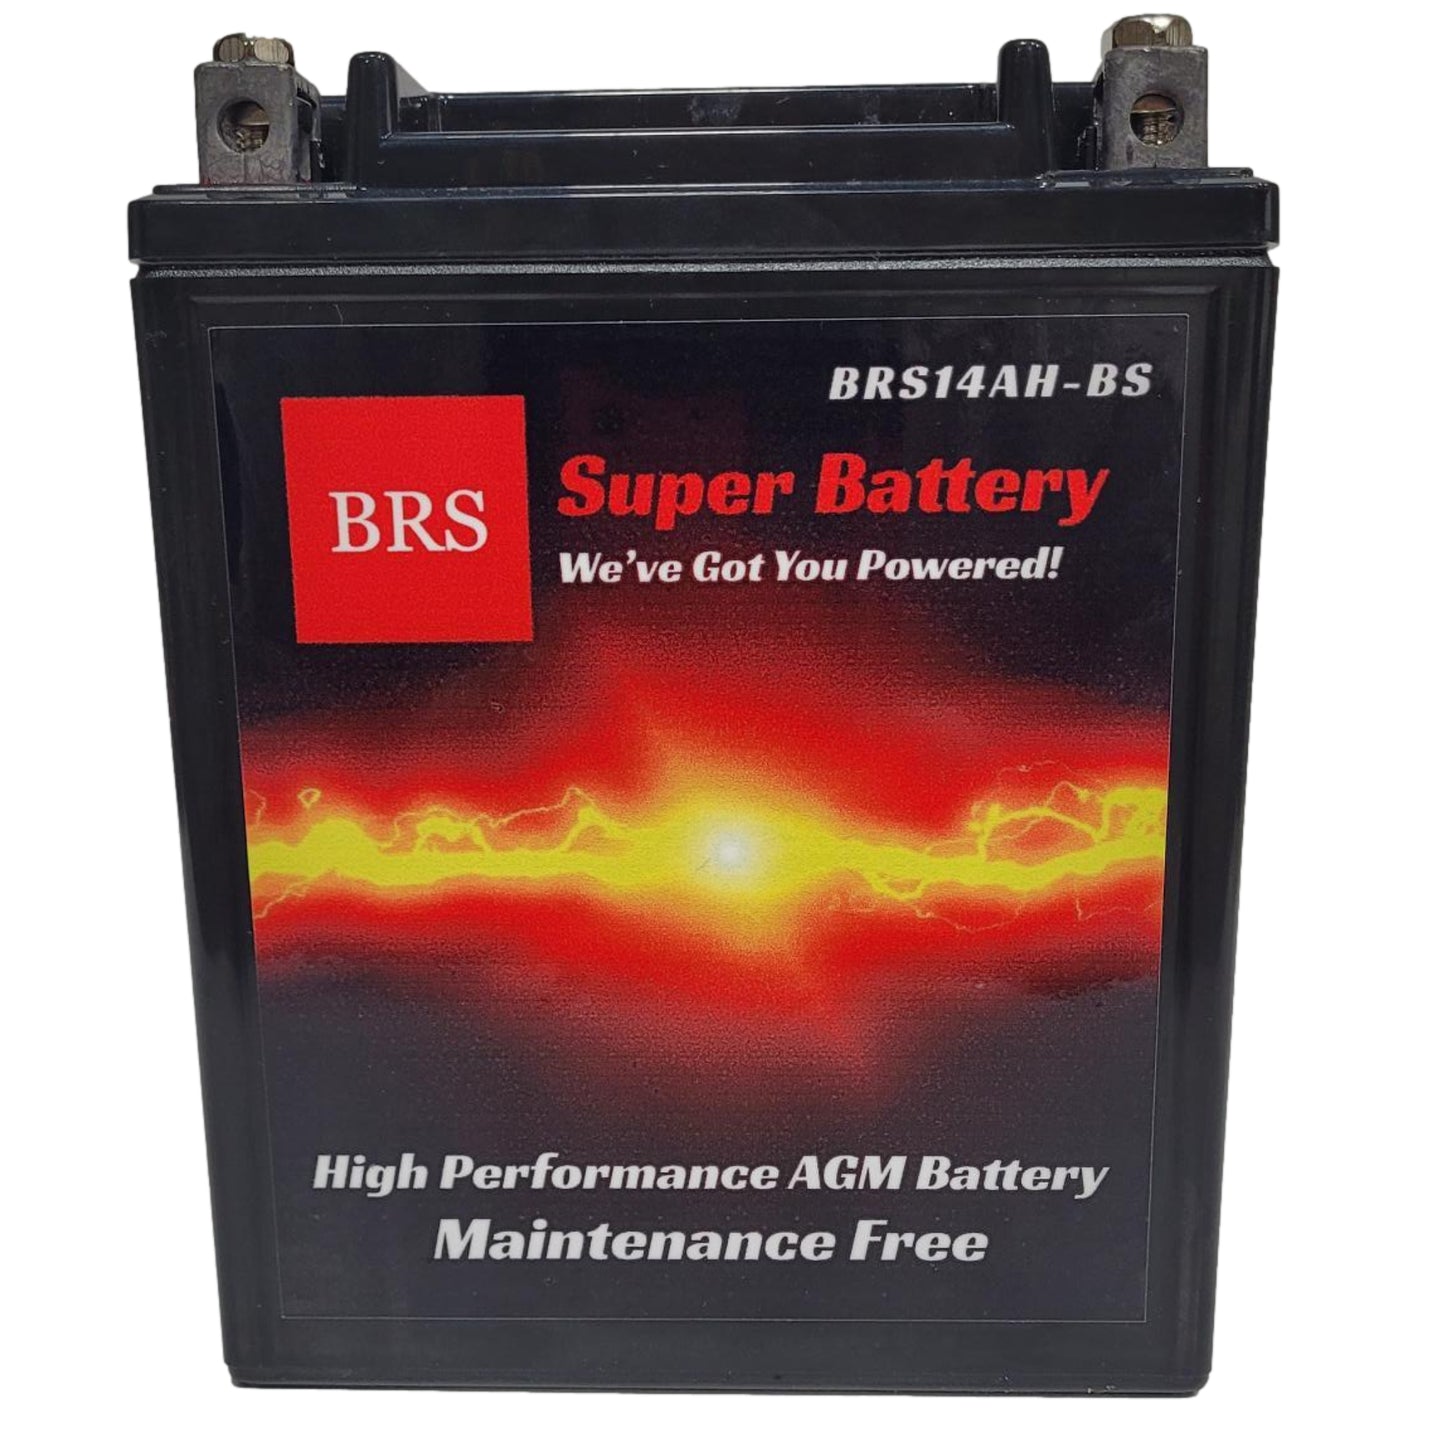 WPX14AH-BS 12v High Performance Sealed AGM PowerSport 10 Year Battery - BRS Super Battery